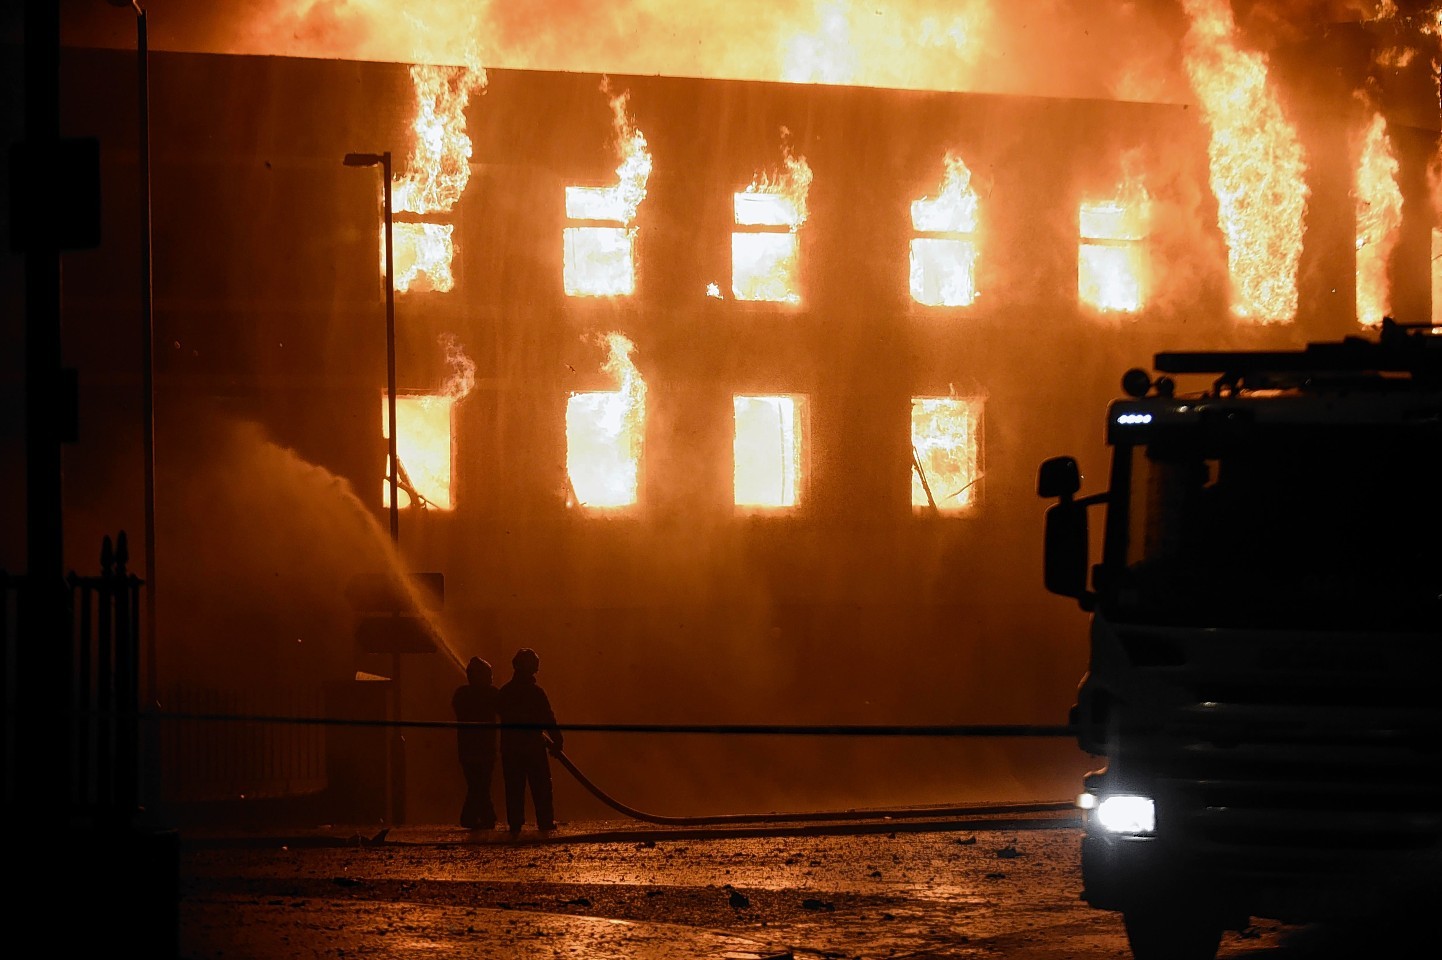 The fire tore through two buildings 